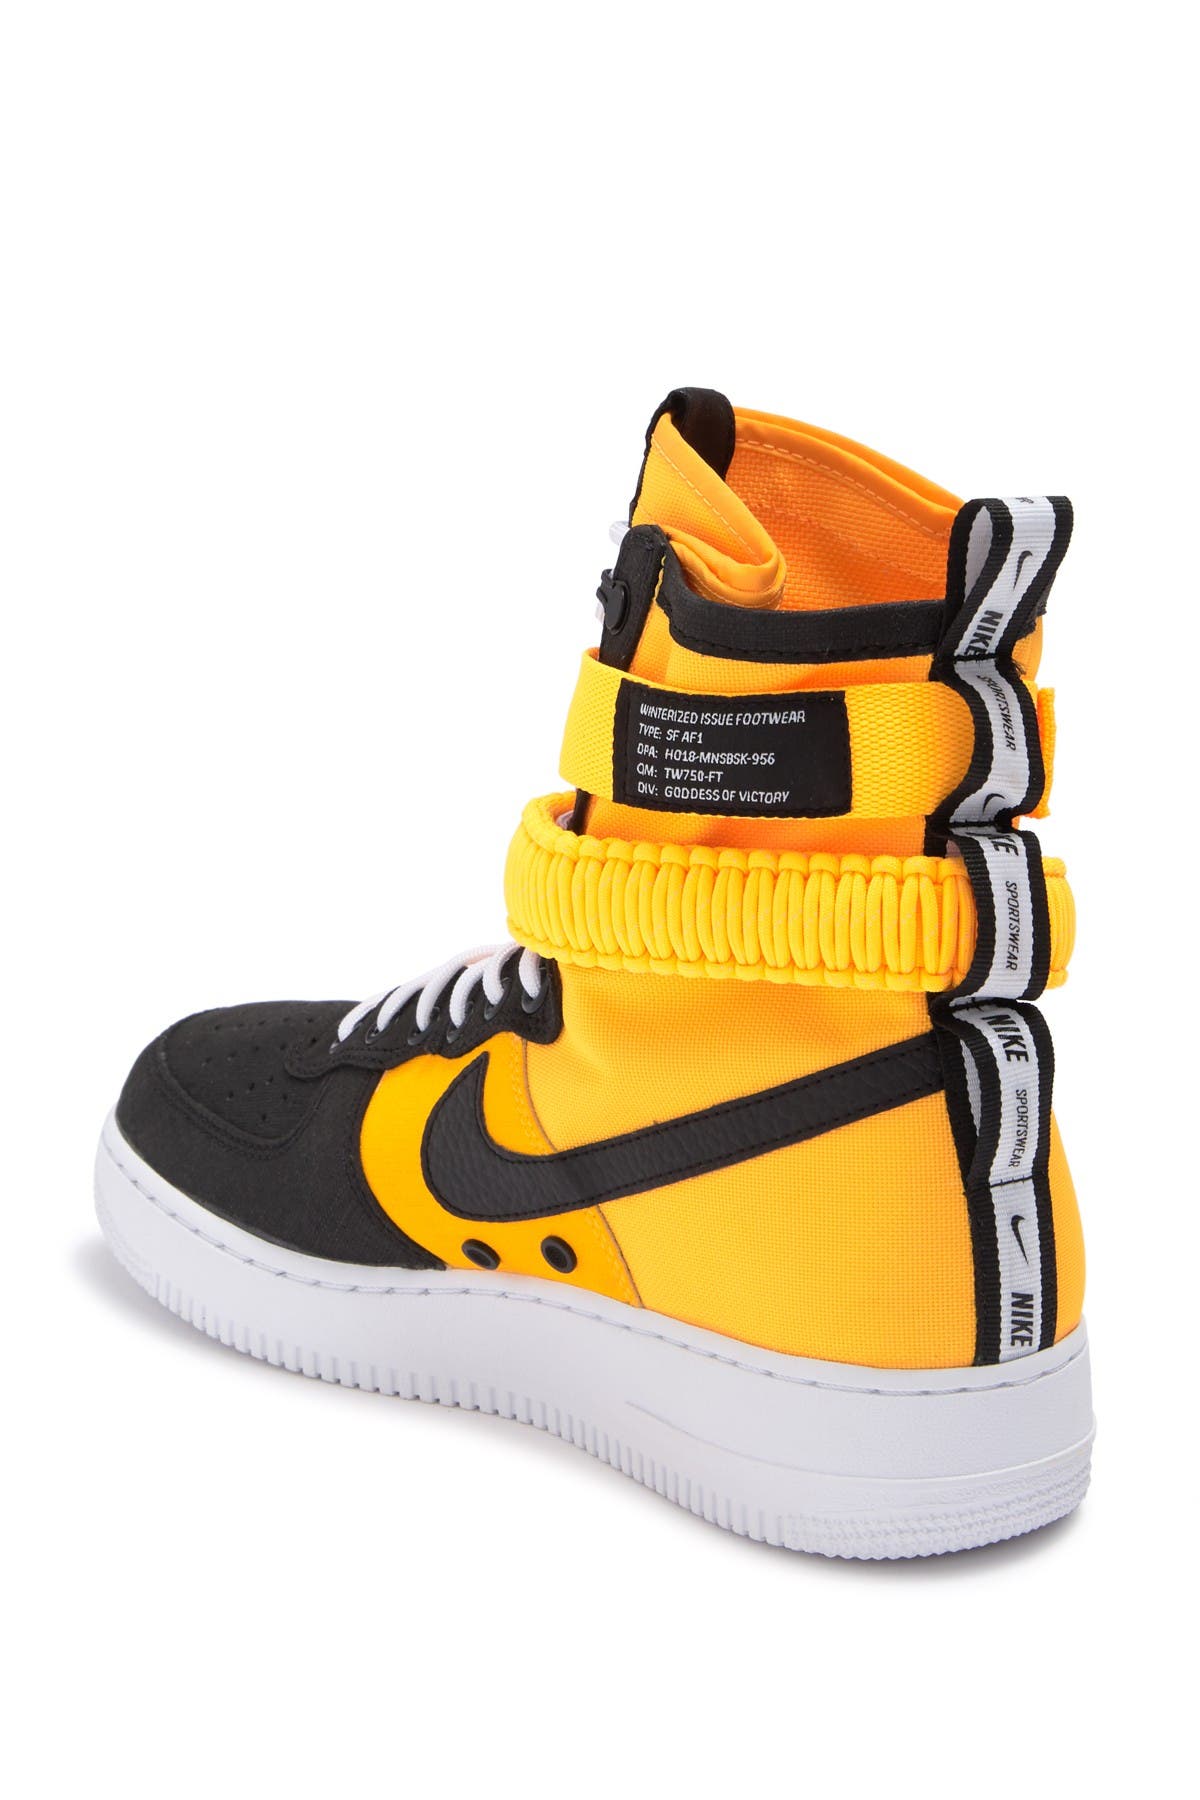 men's nike sf air force 1 boots